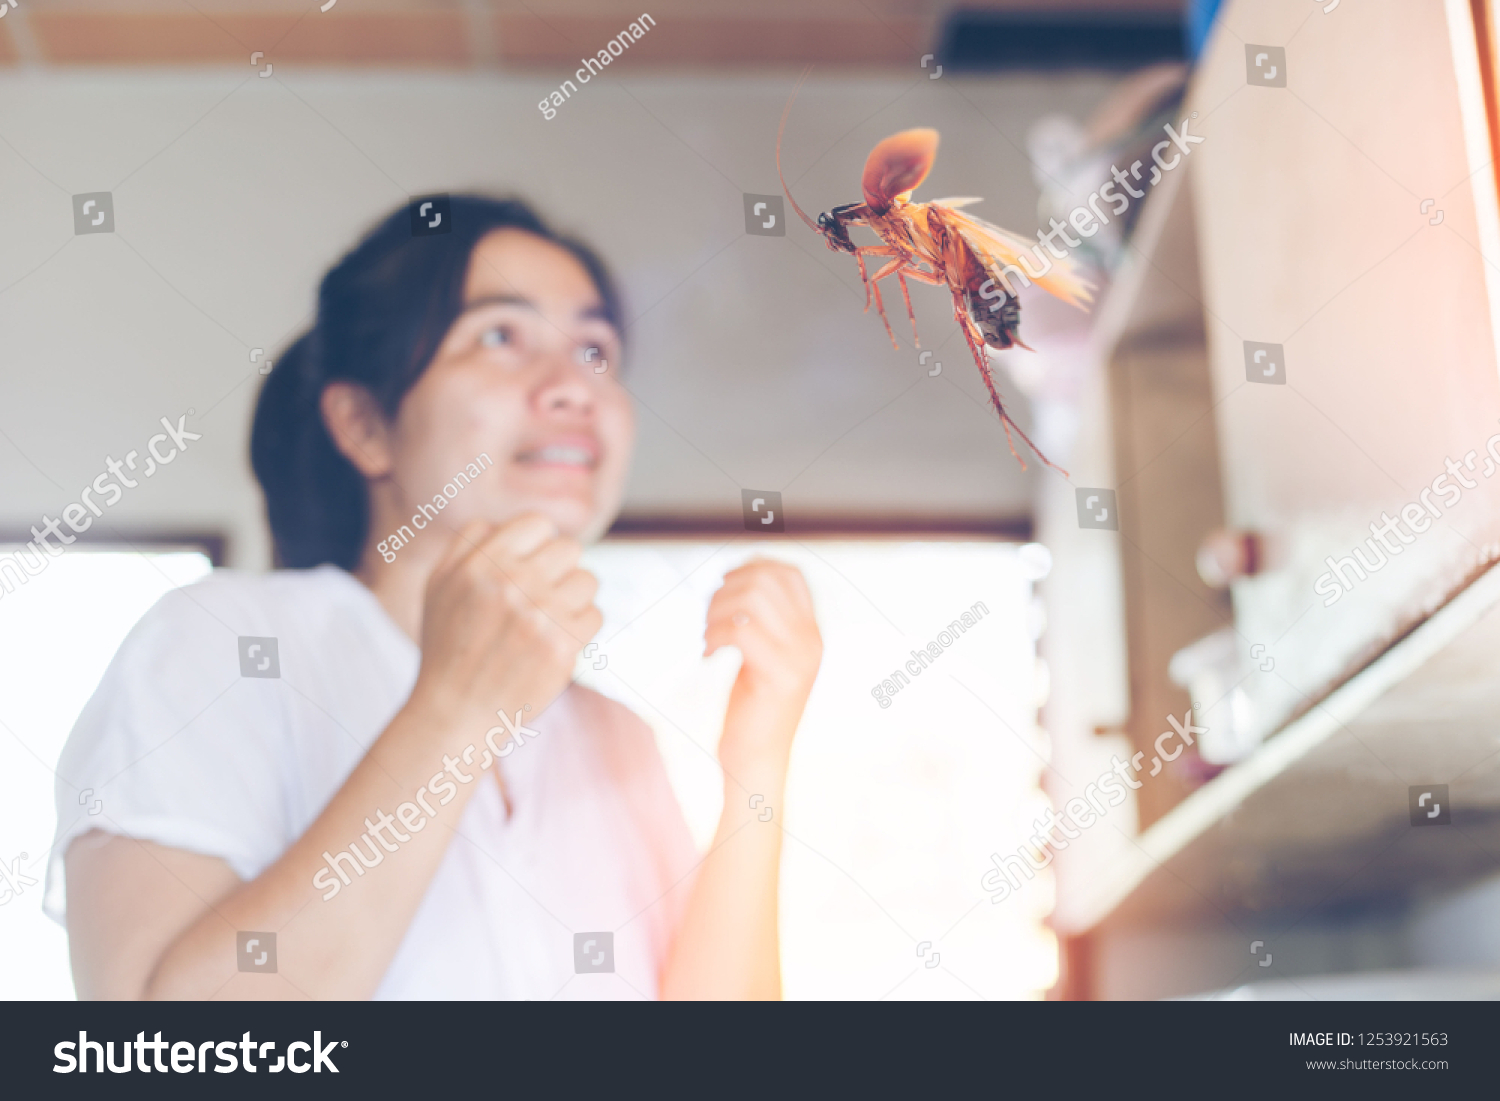 stock-photo-the-woman-is-going-to-hit-cockroaches-in-the-kitchen-cockroaches-are-flying-into-the-house-1253921563.jpg